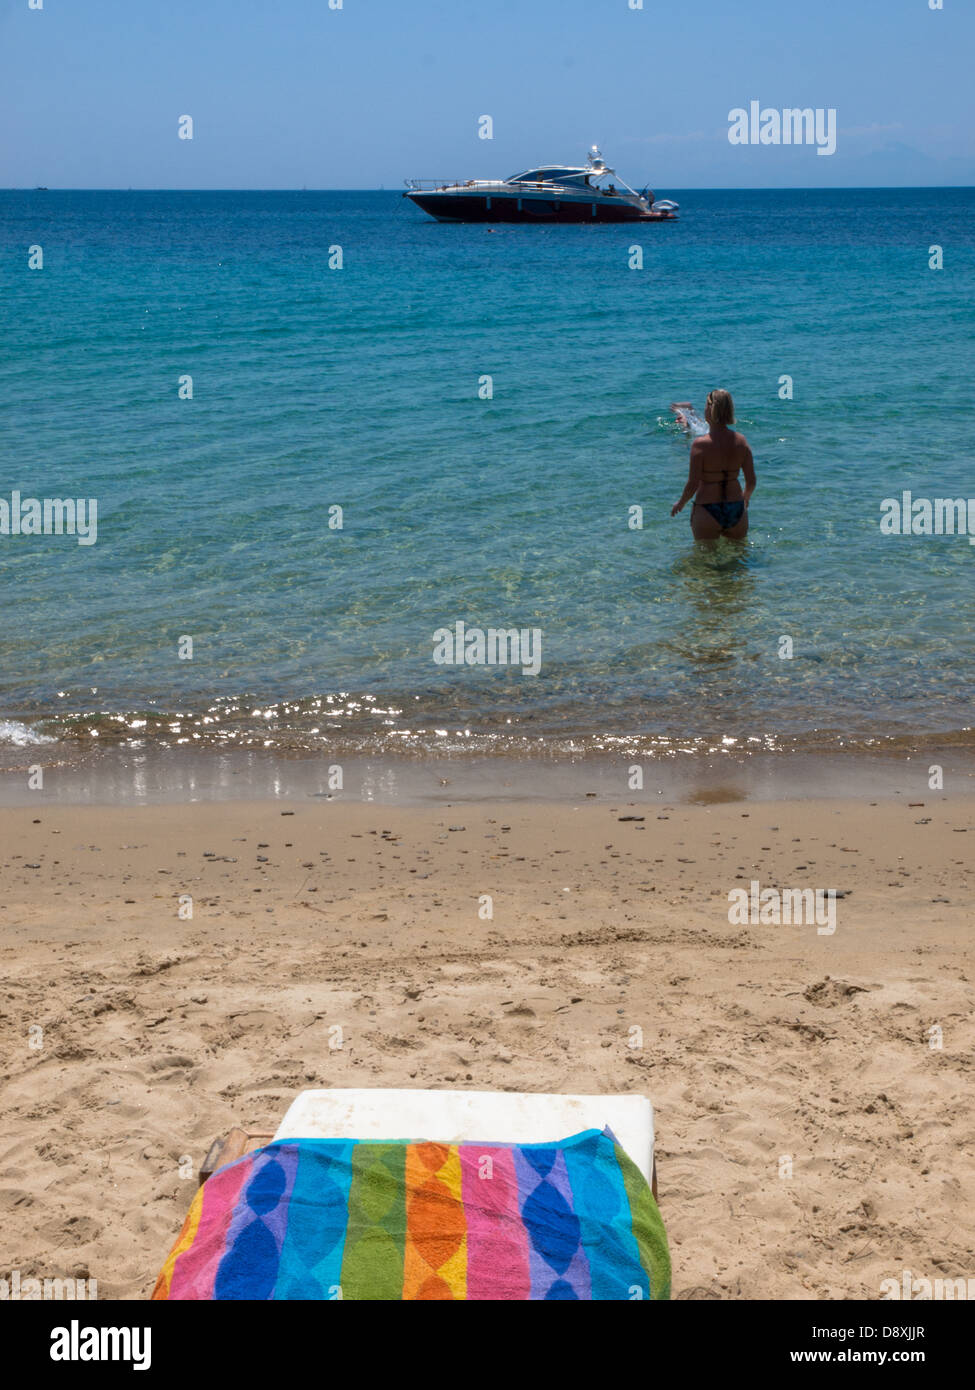 A holidaymaker stands in the Aegean Sea looking out to a motorboat off the Greek island of Skiathos. Stock Photo